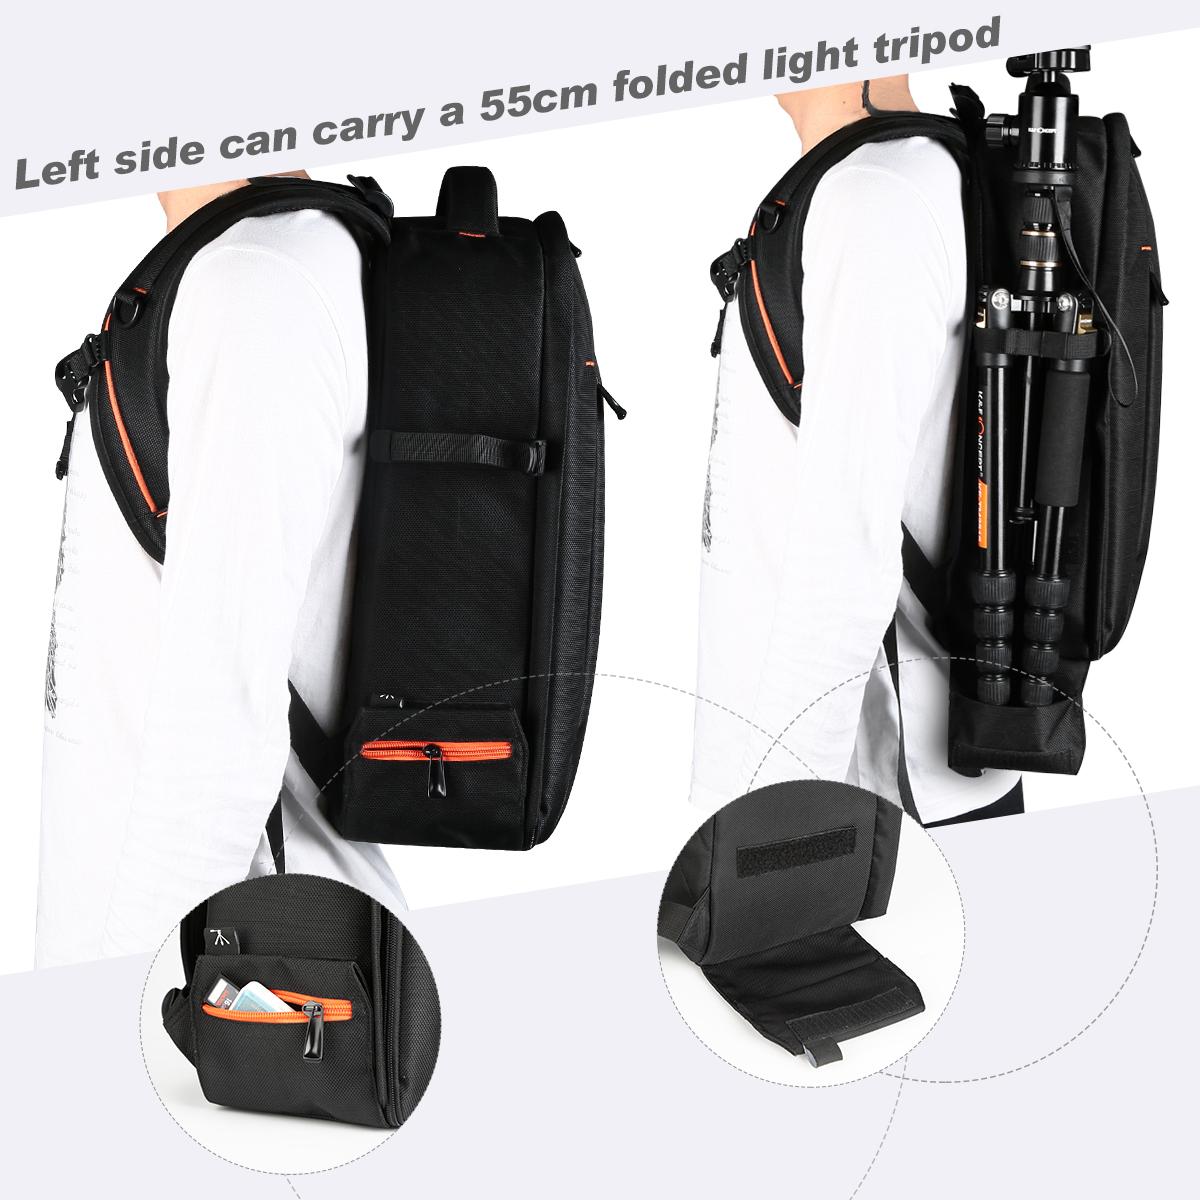 DSLR Camera Backpack for Travel Outdoor Photography | K&F Concept ...